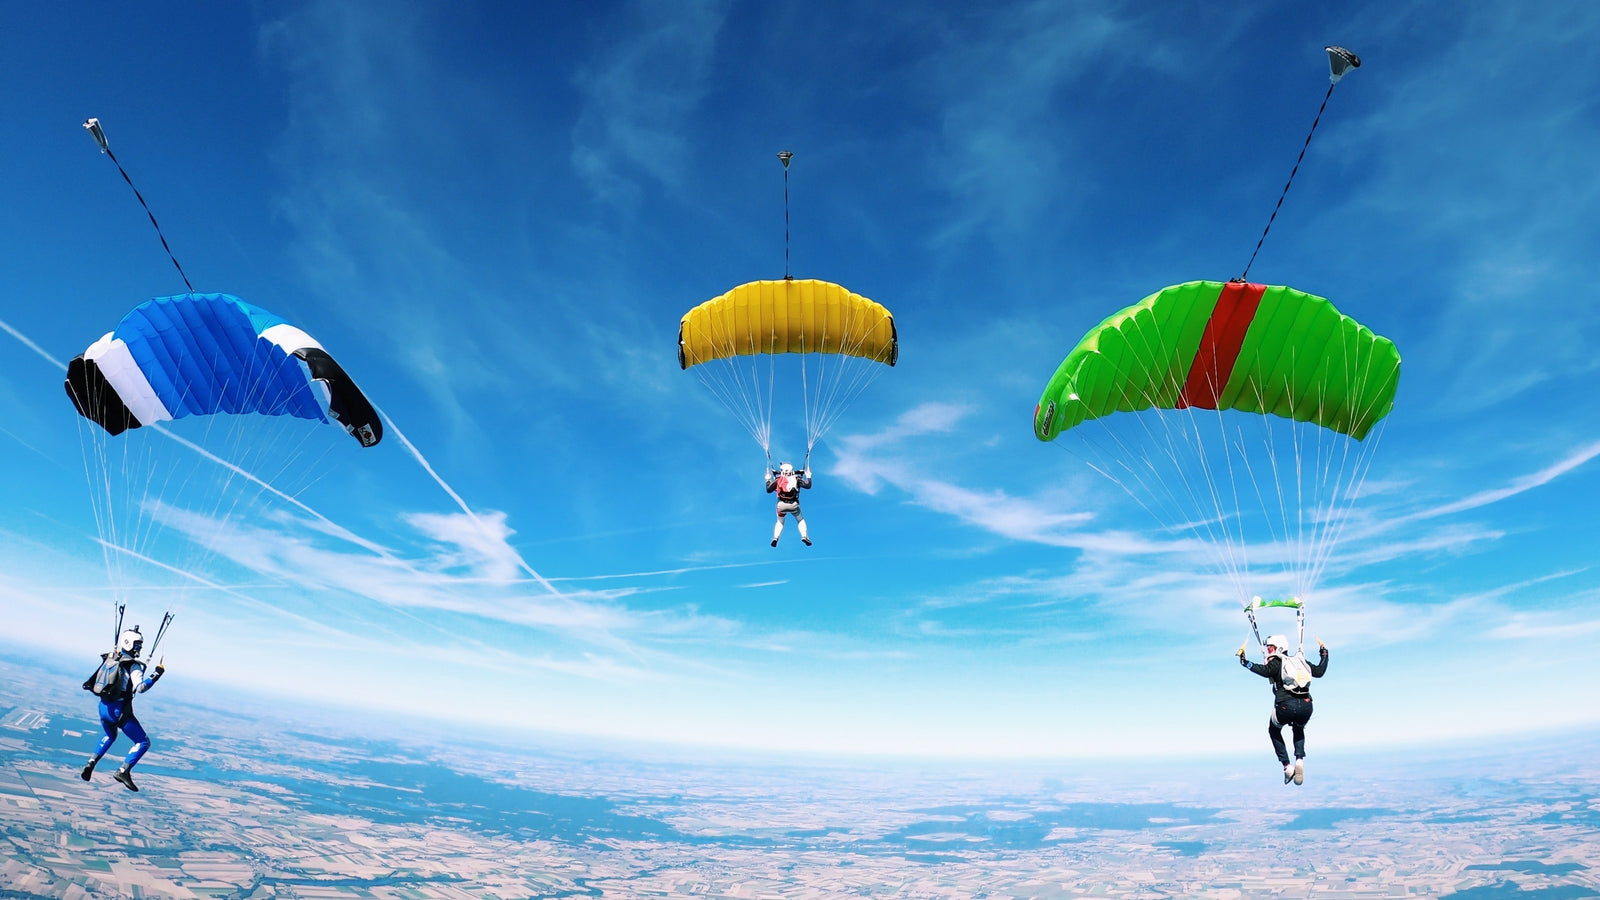 Download Upside Down Falling Above Clouds Skydiving Wallpaper | Wallpapers .com